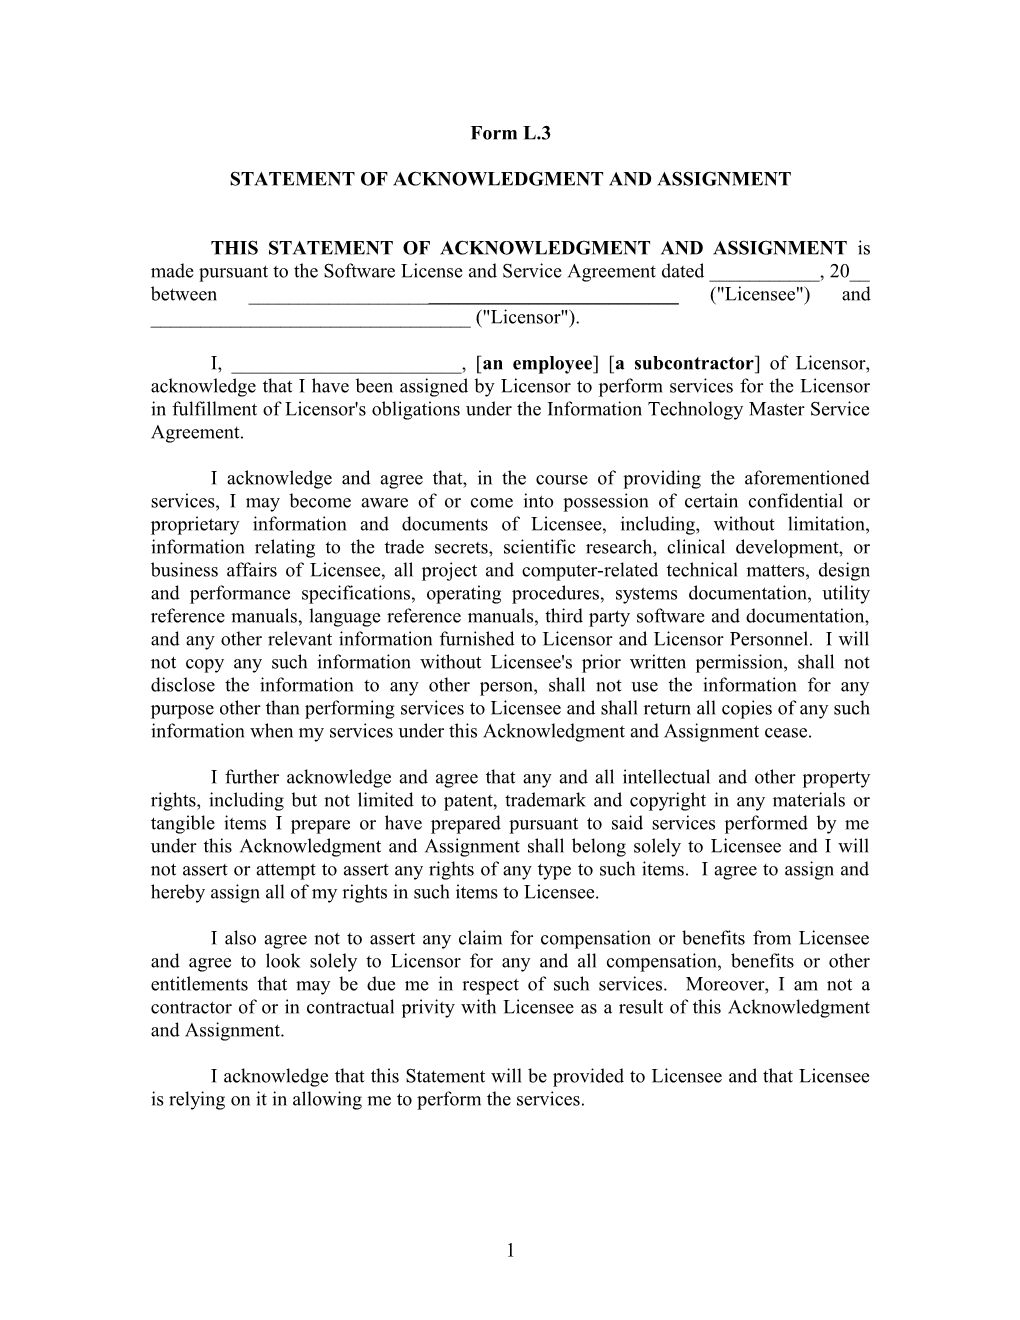 Statement of Acknowledgment and Assignment